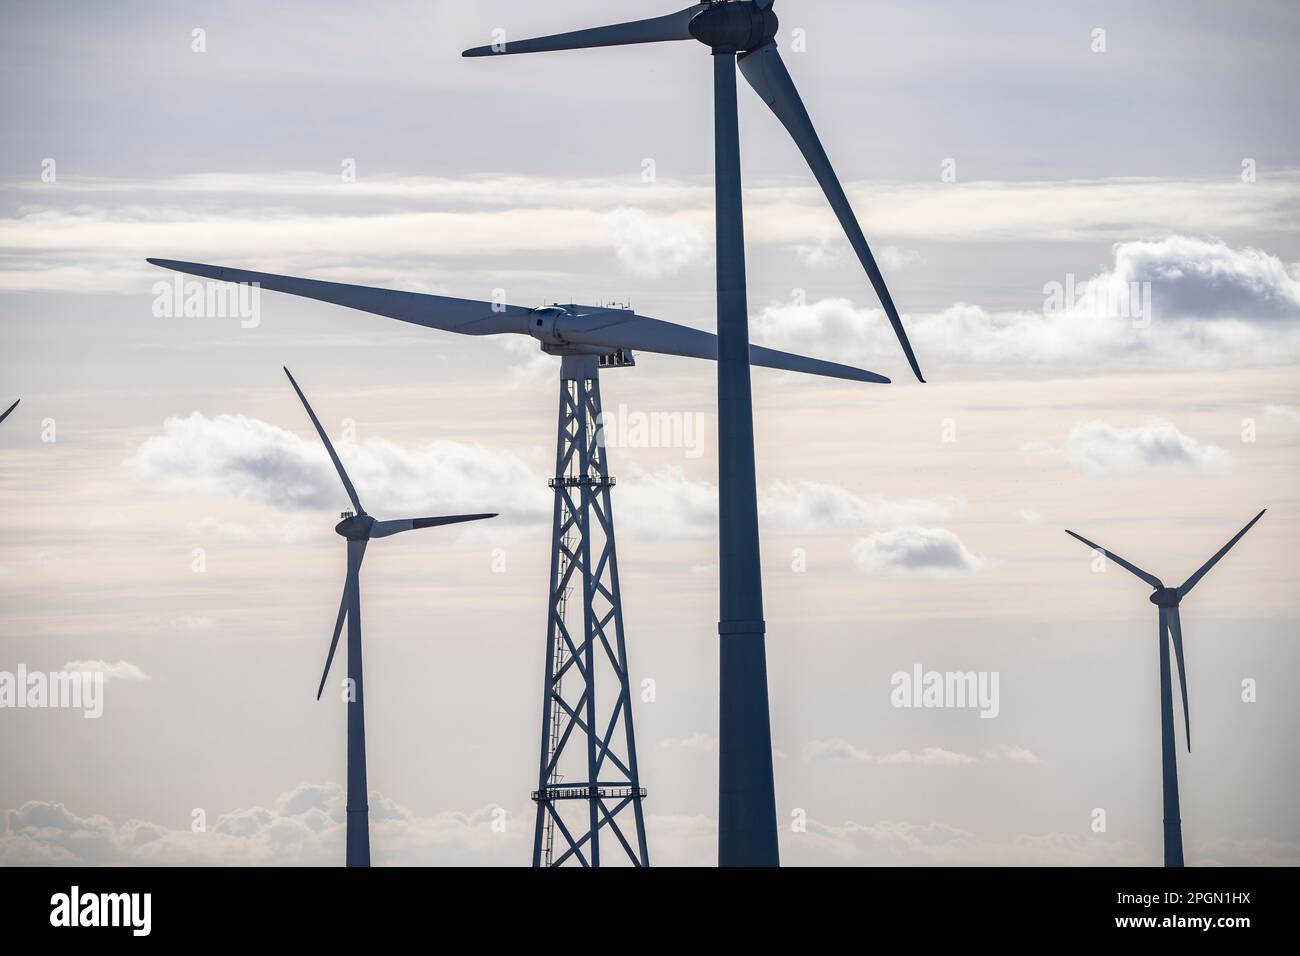 Two-blade rotor, wind turbine with two rotor blades from 2-B Energy in the industrial harbour of Eemshaven, wind turbine, wind power plant Stock Photo